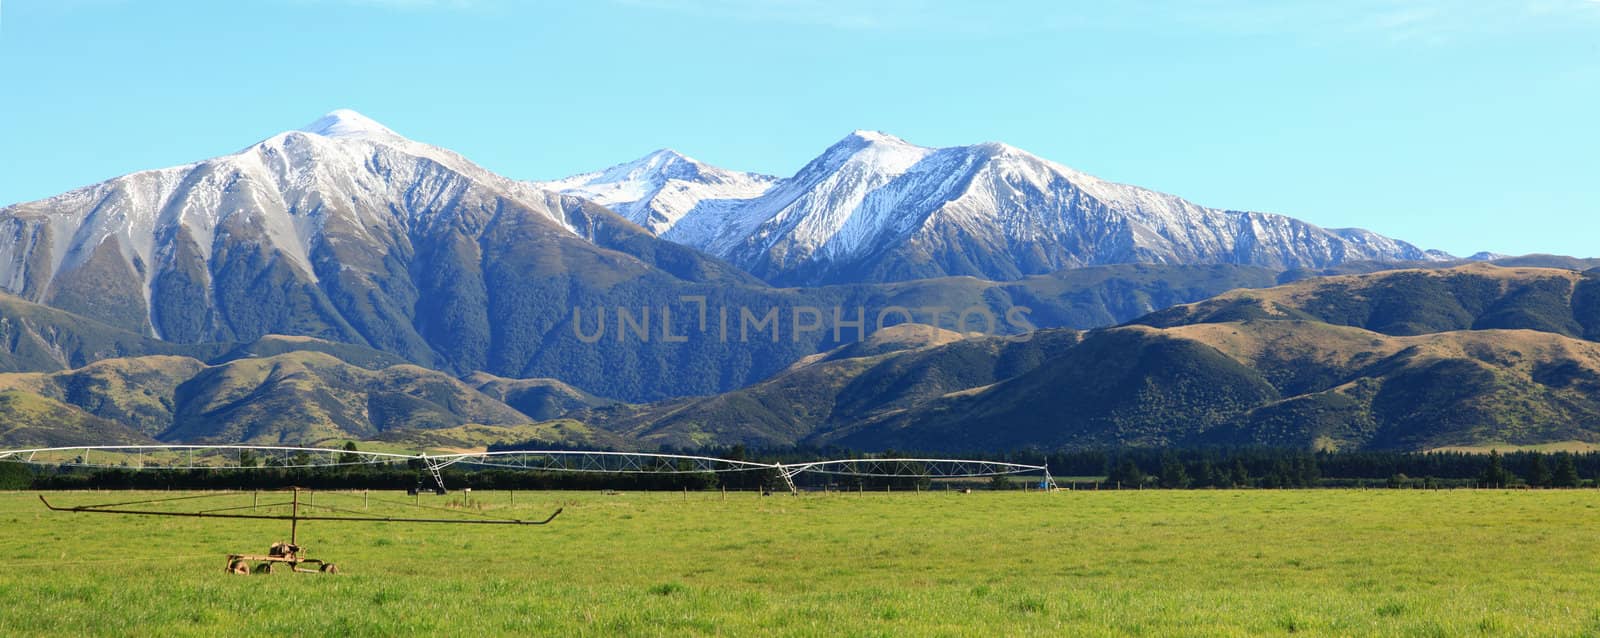 panaramic of great southern alpine alps in New Zealand